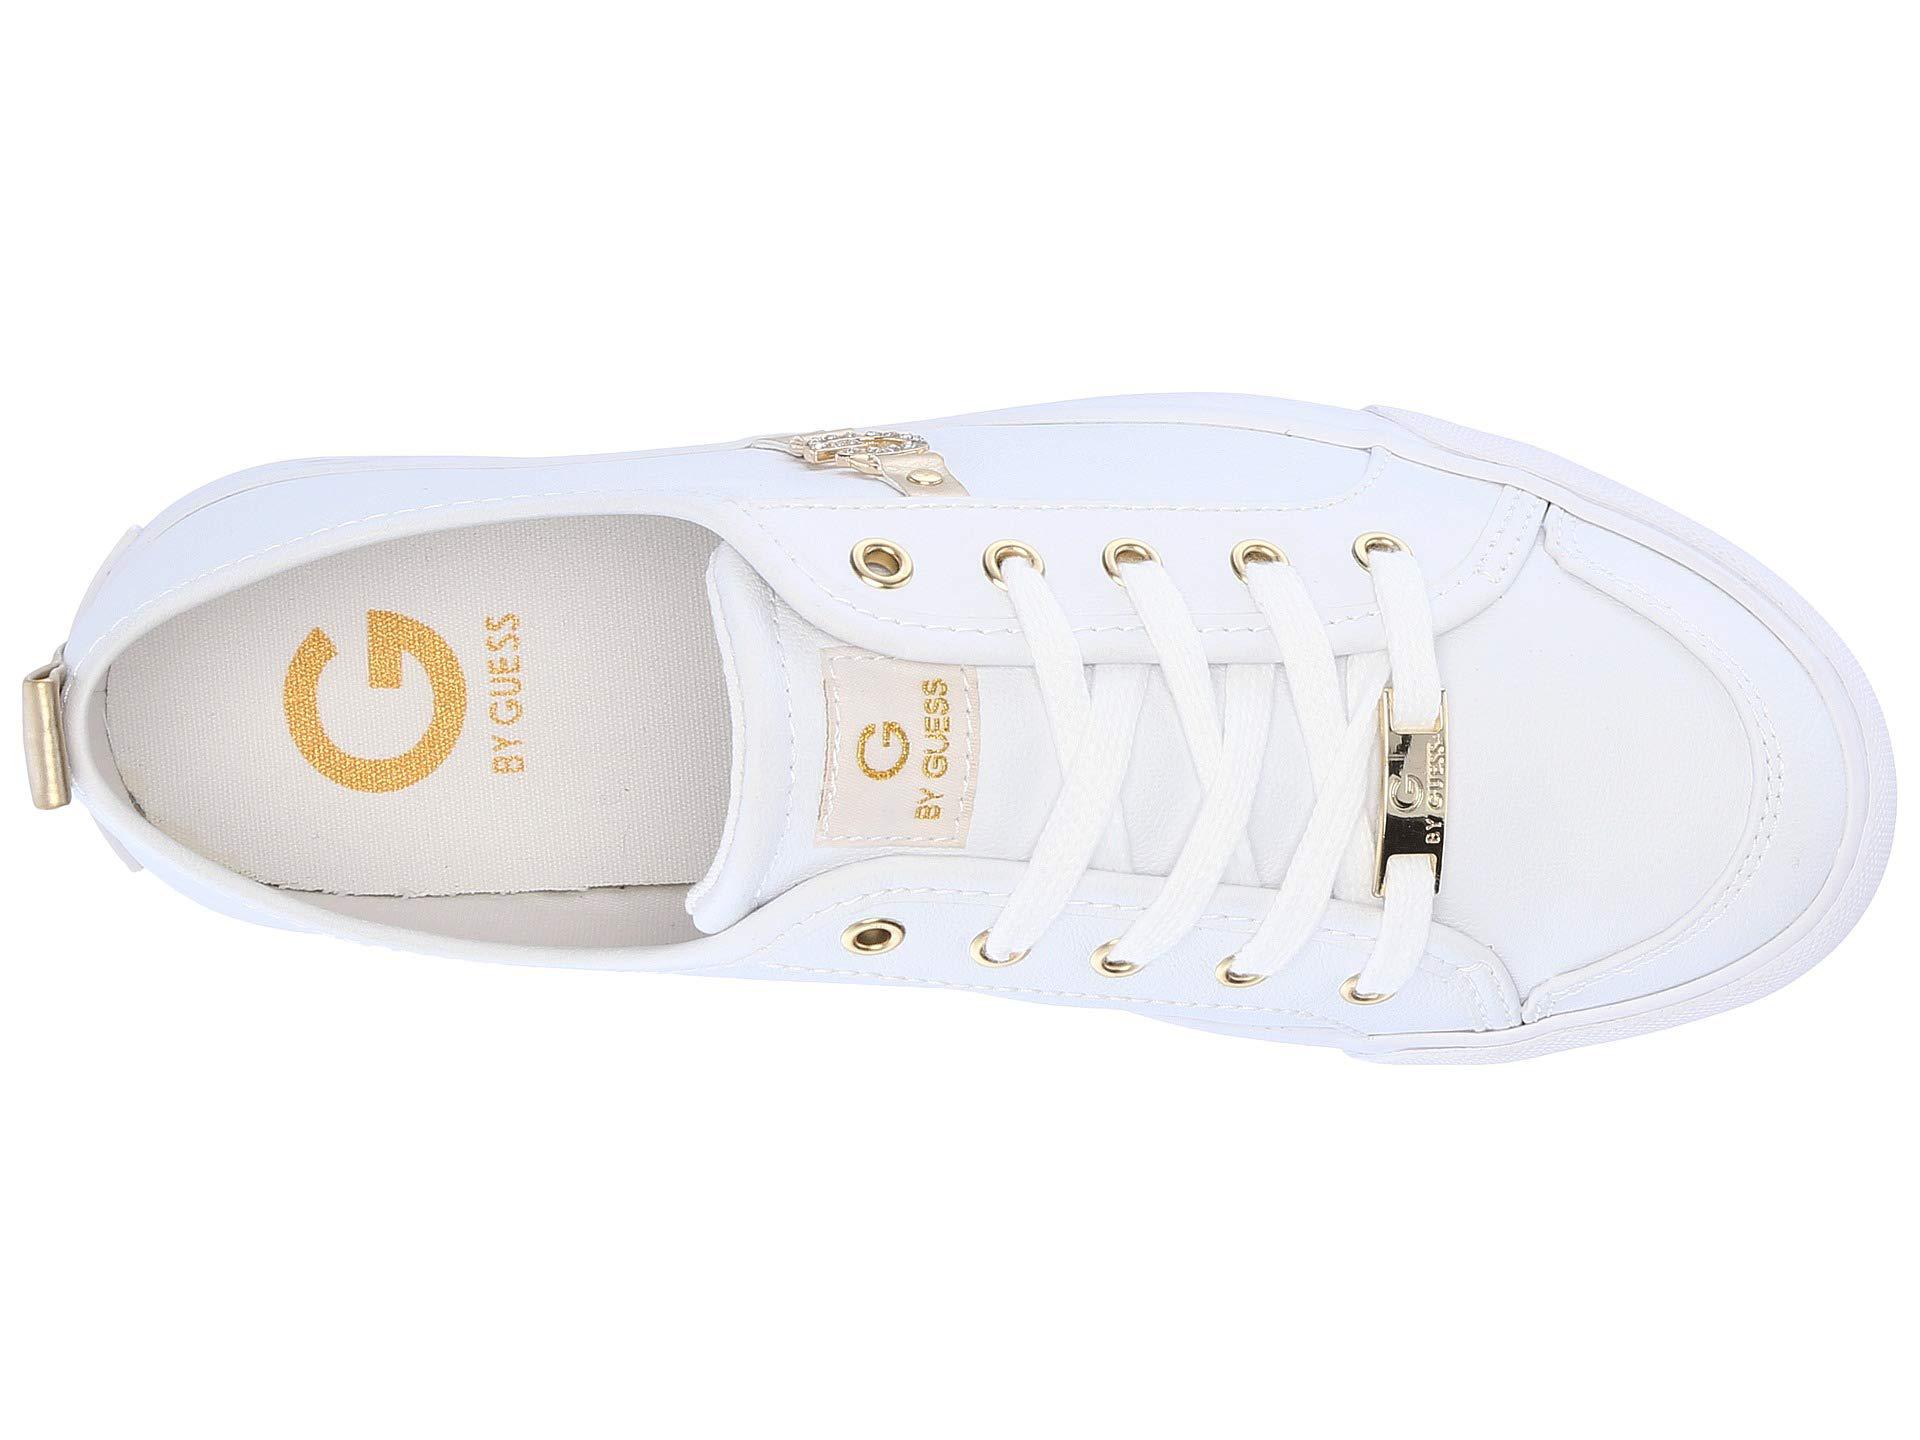 G by Guess Banx2 (white/gold/gold) Women's Shoes Lyst